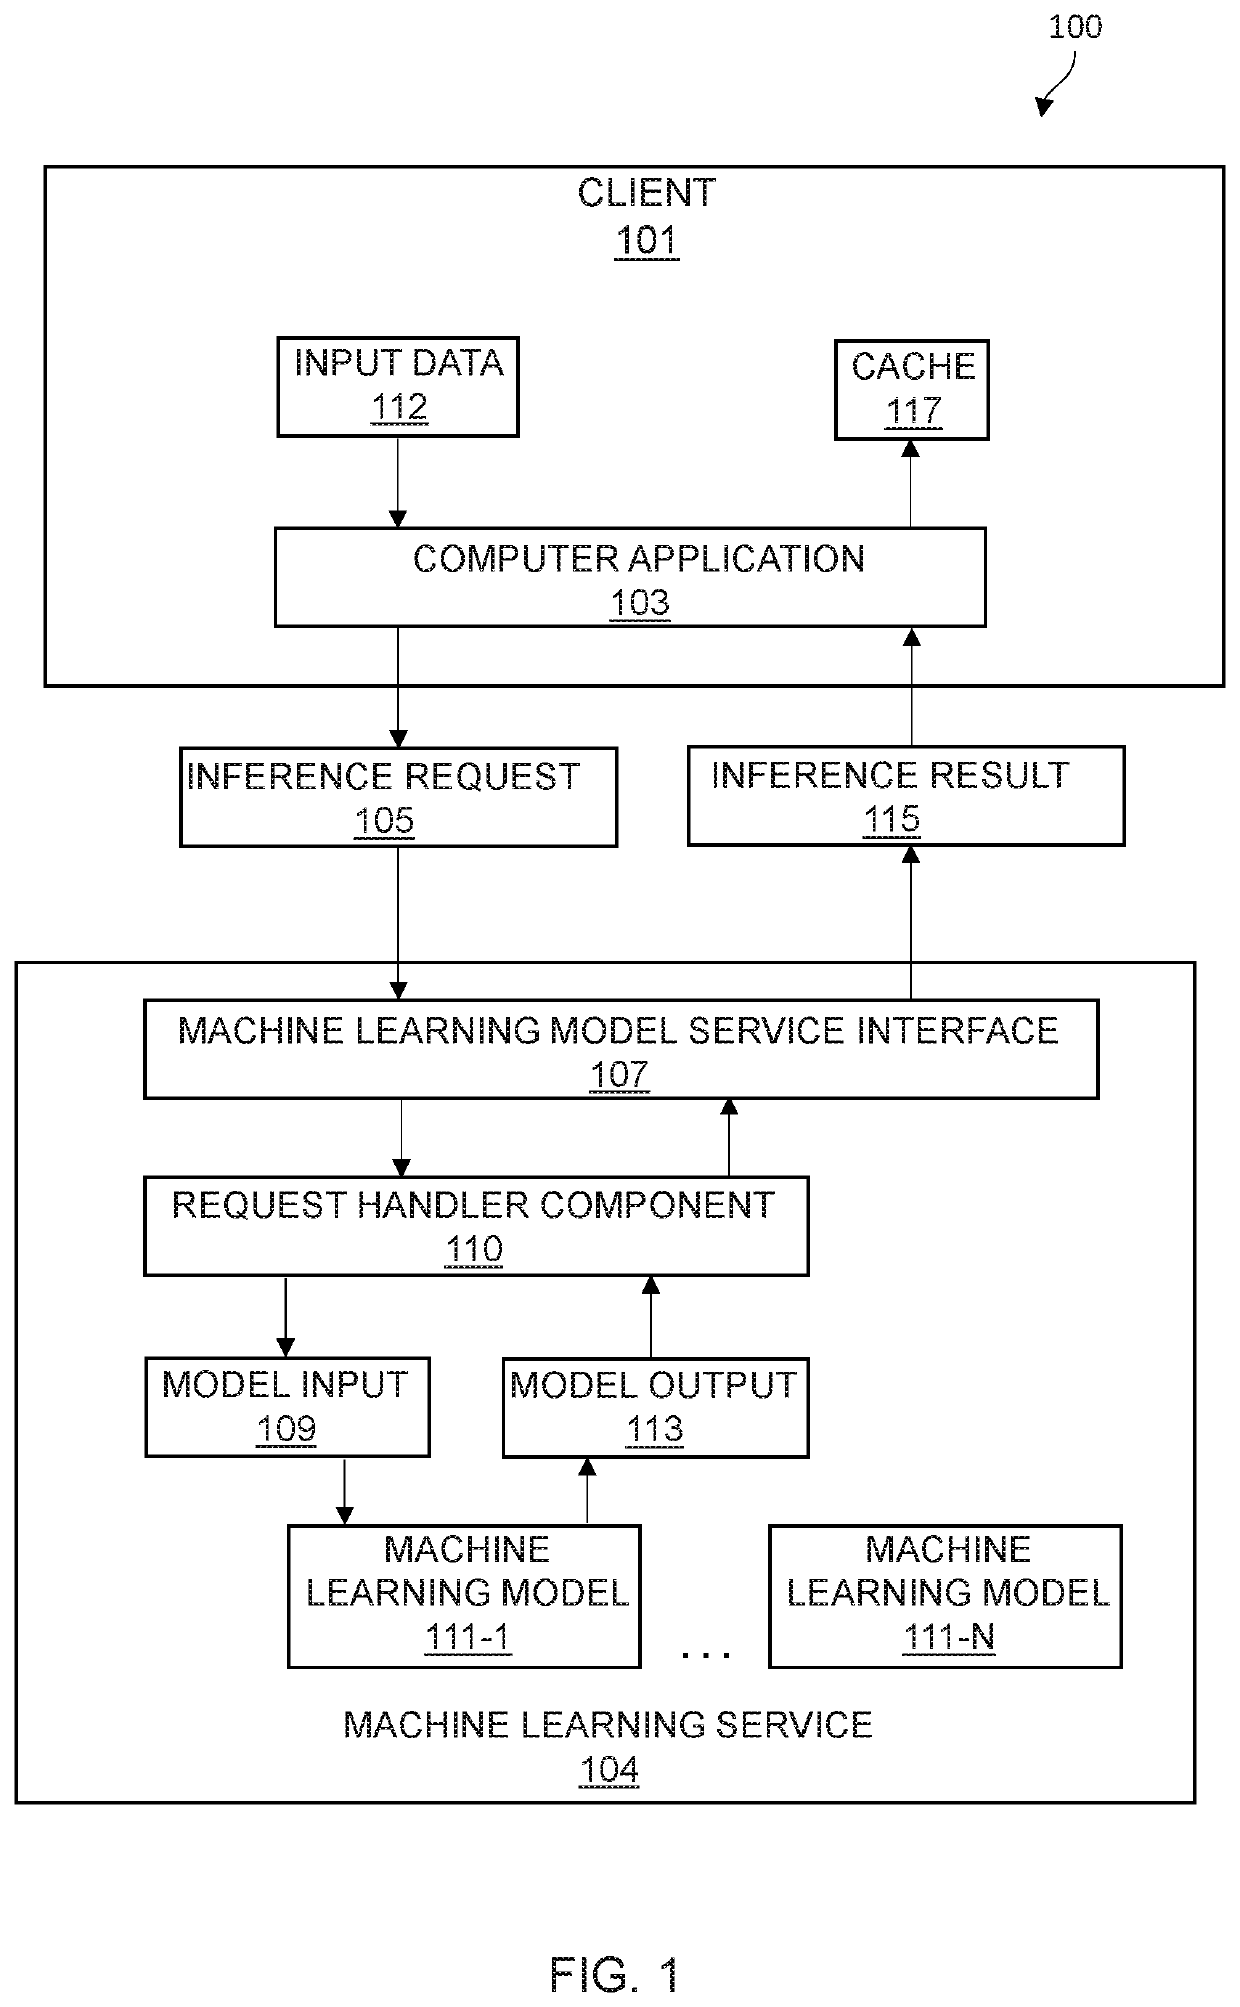 Inference of machine learning models